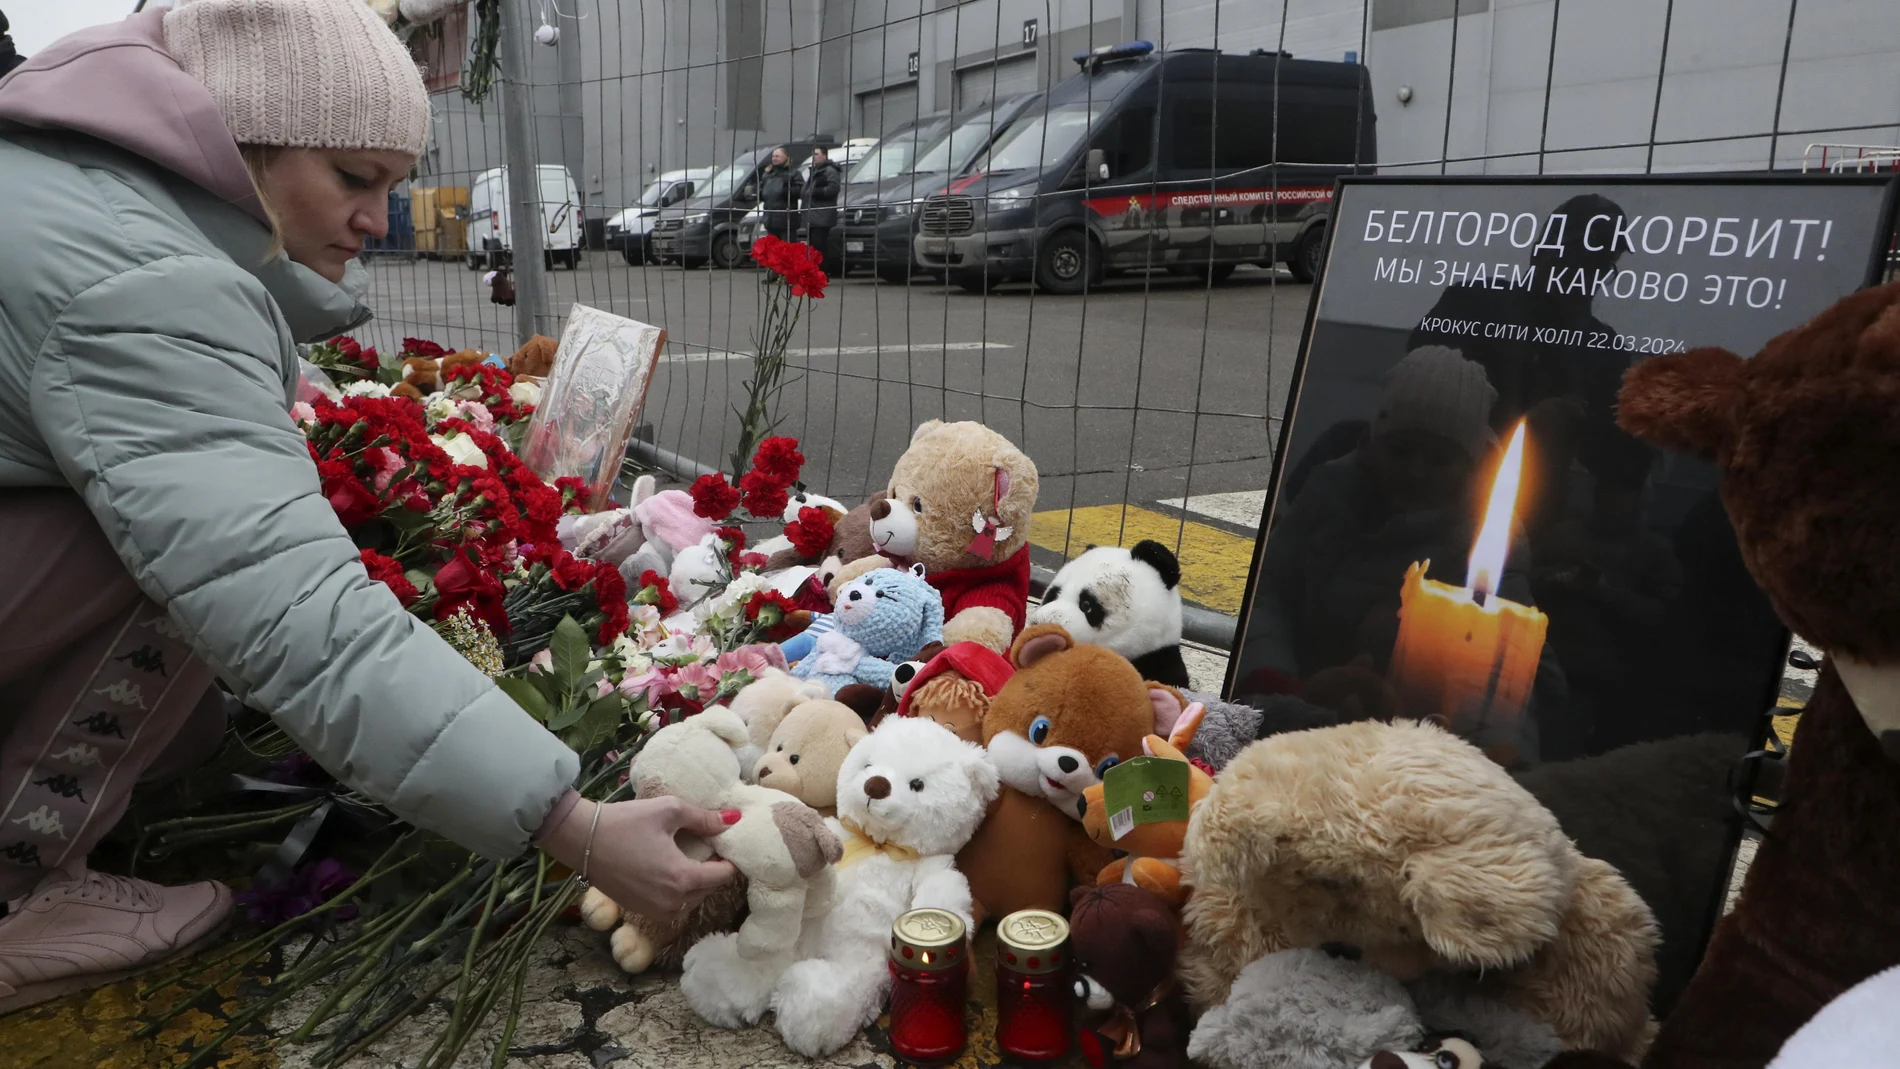 A woman mourns and brings a toy at the Crocus City Hall concert venue following a terrorist attack in Krasnogorsk, outside Moscow, Russia, 23 March 2024.